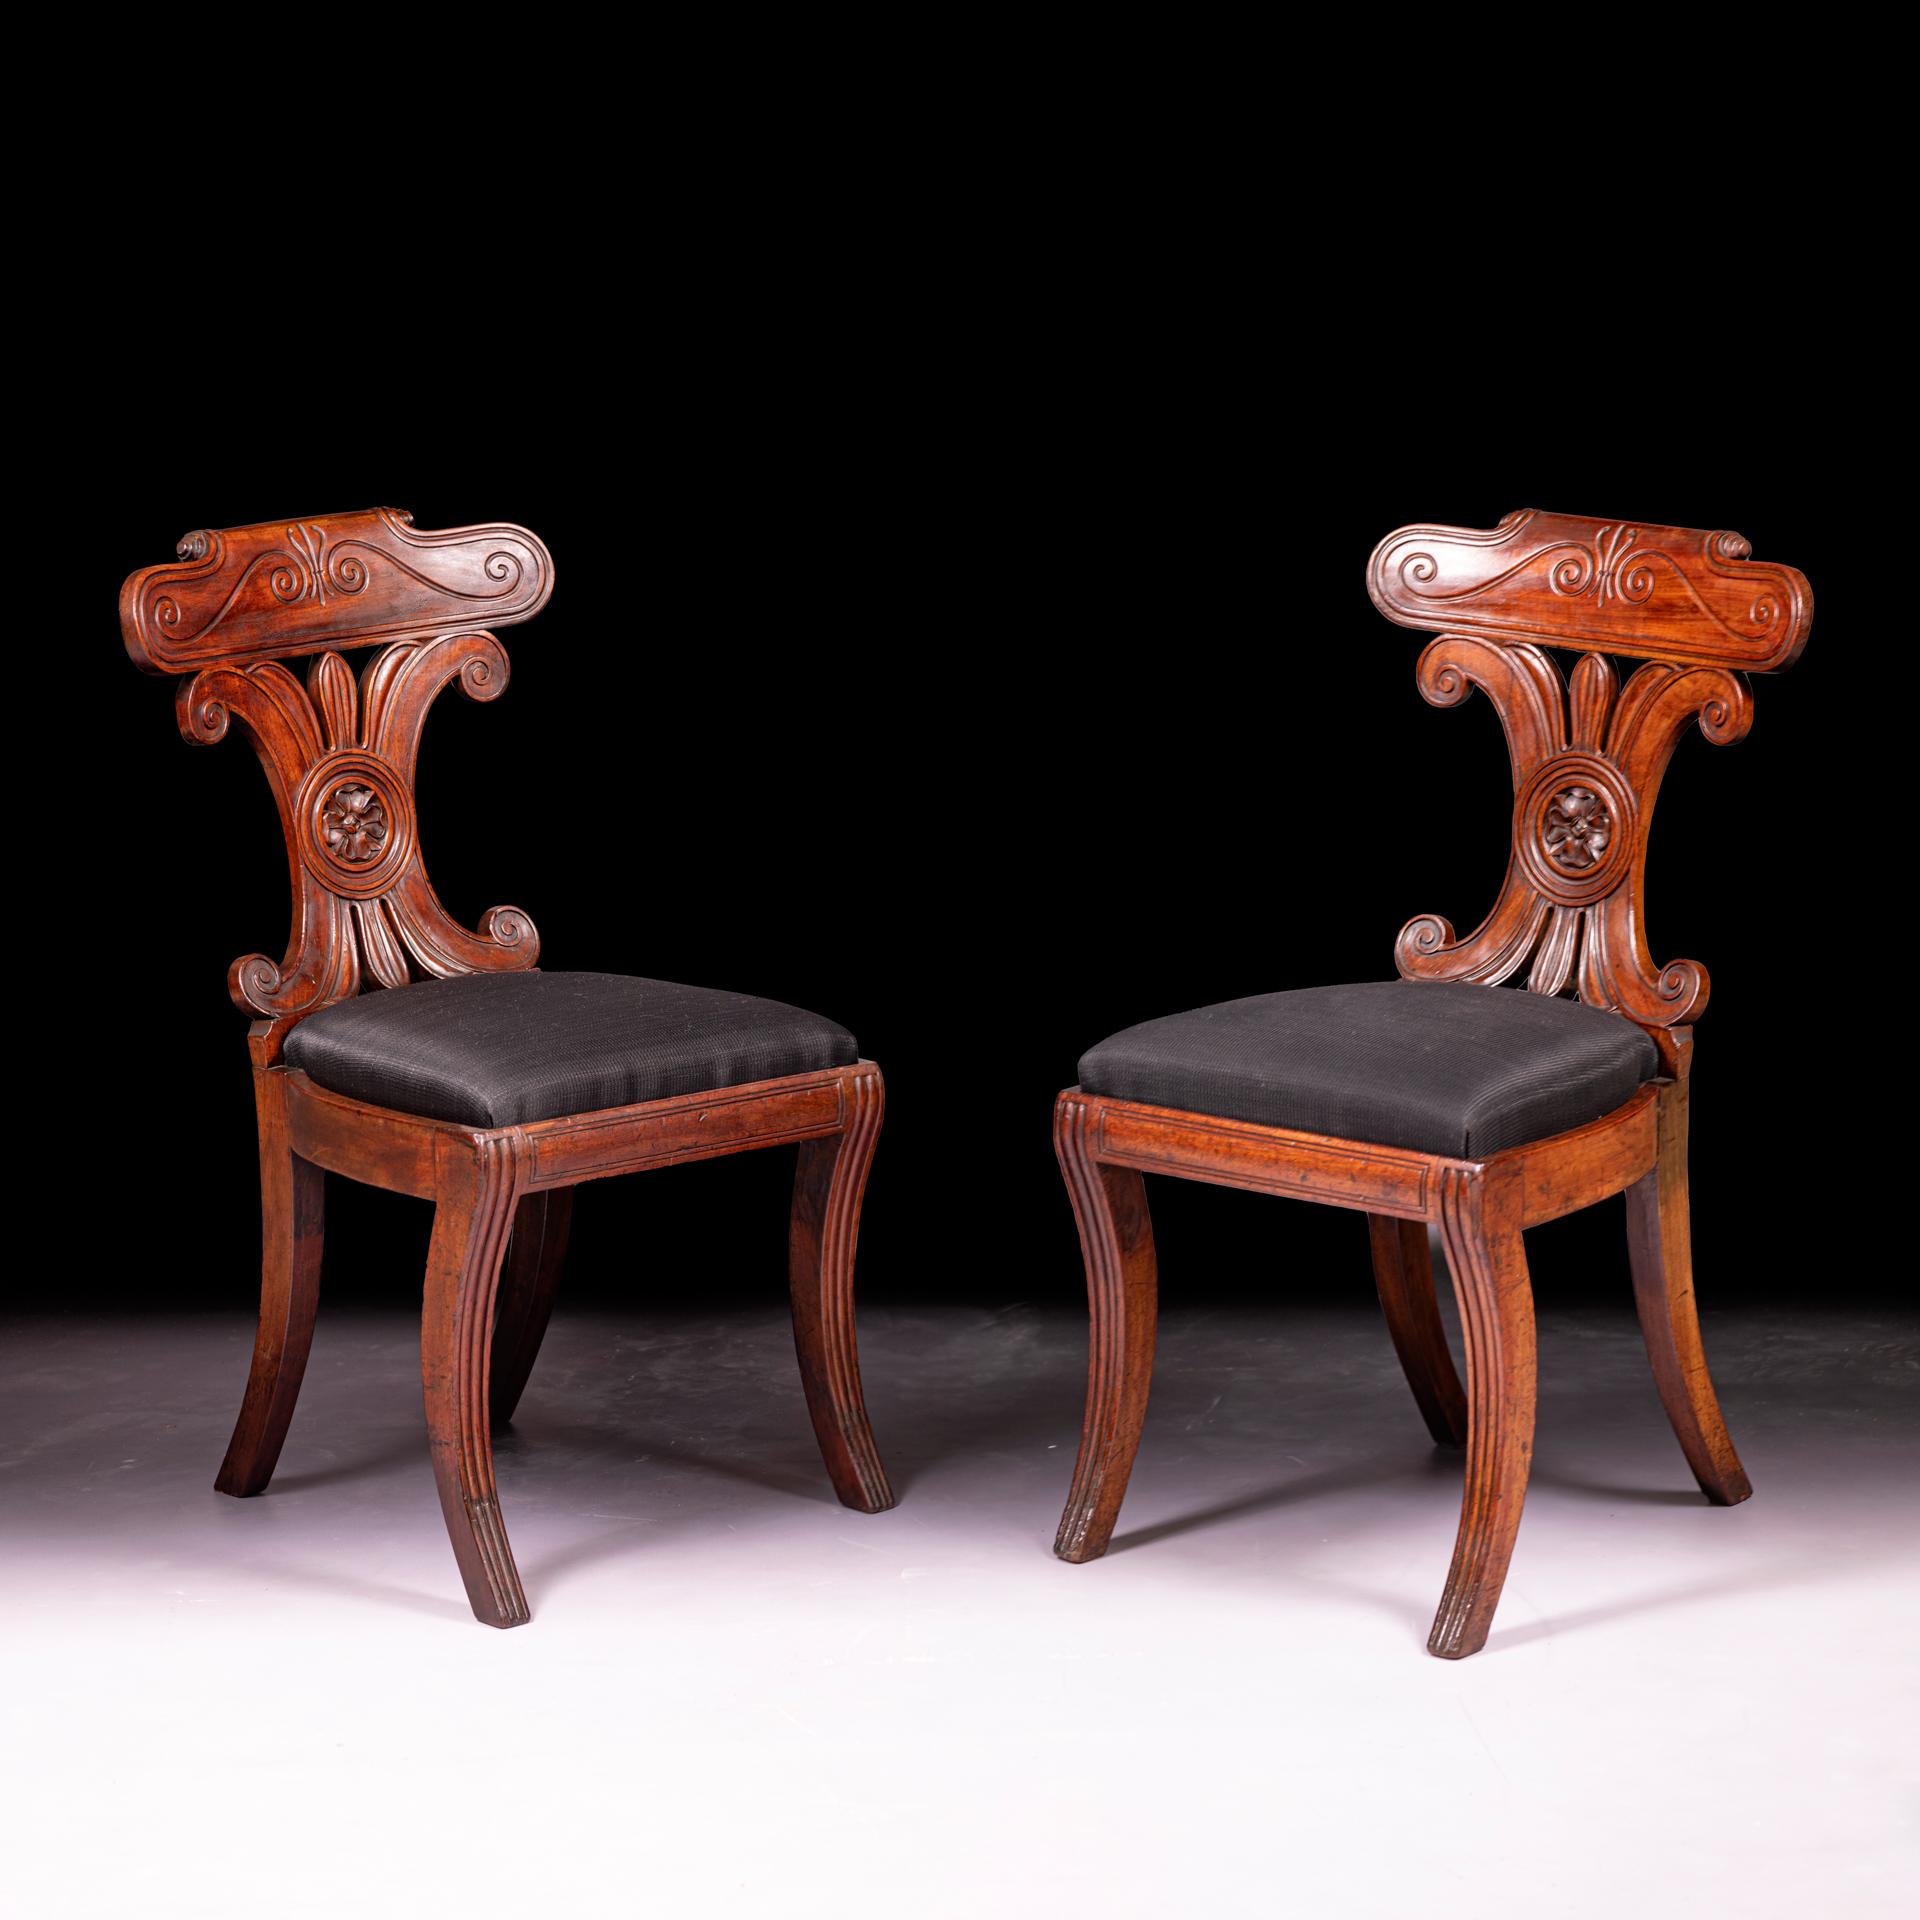 Pair Of Early 19th Century Irish Neo-Grecian Style Regency Side / Hall Chairs For Sale 5